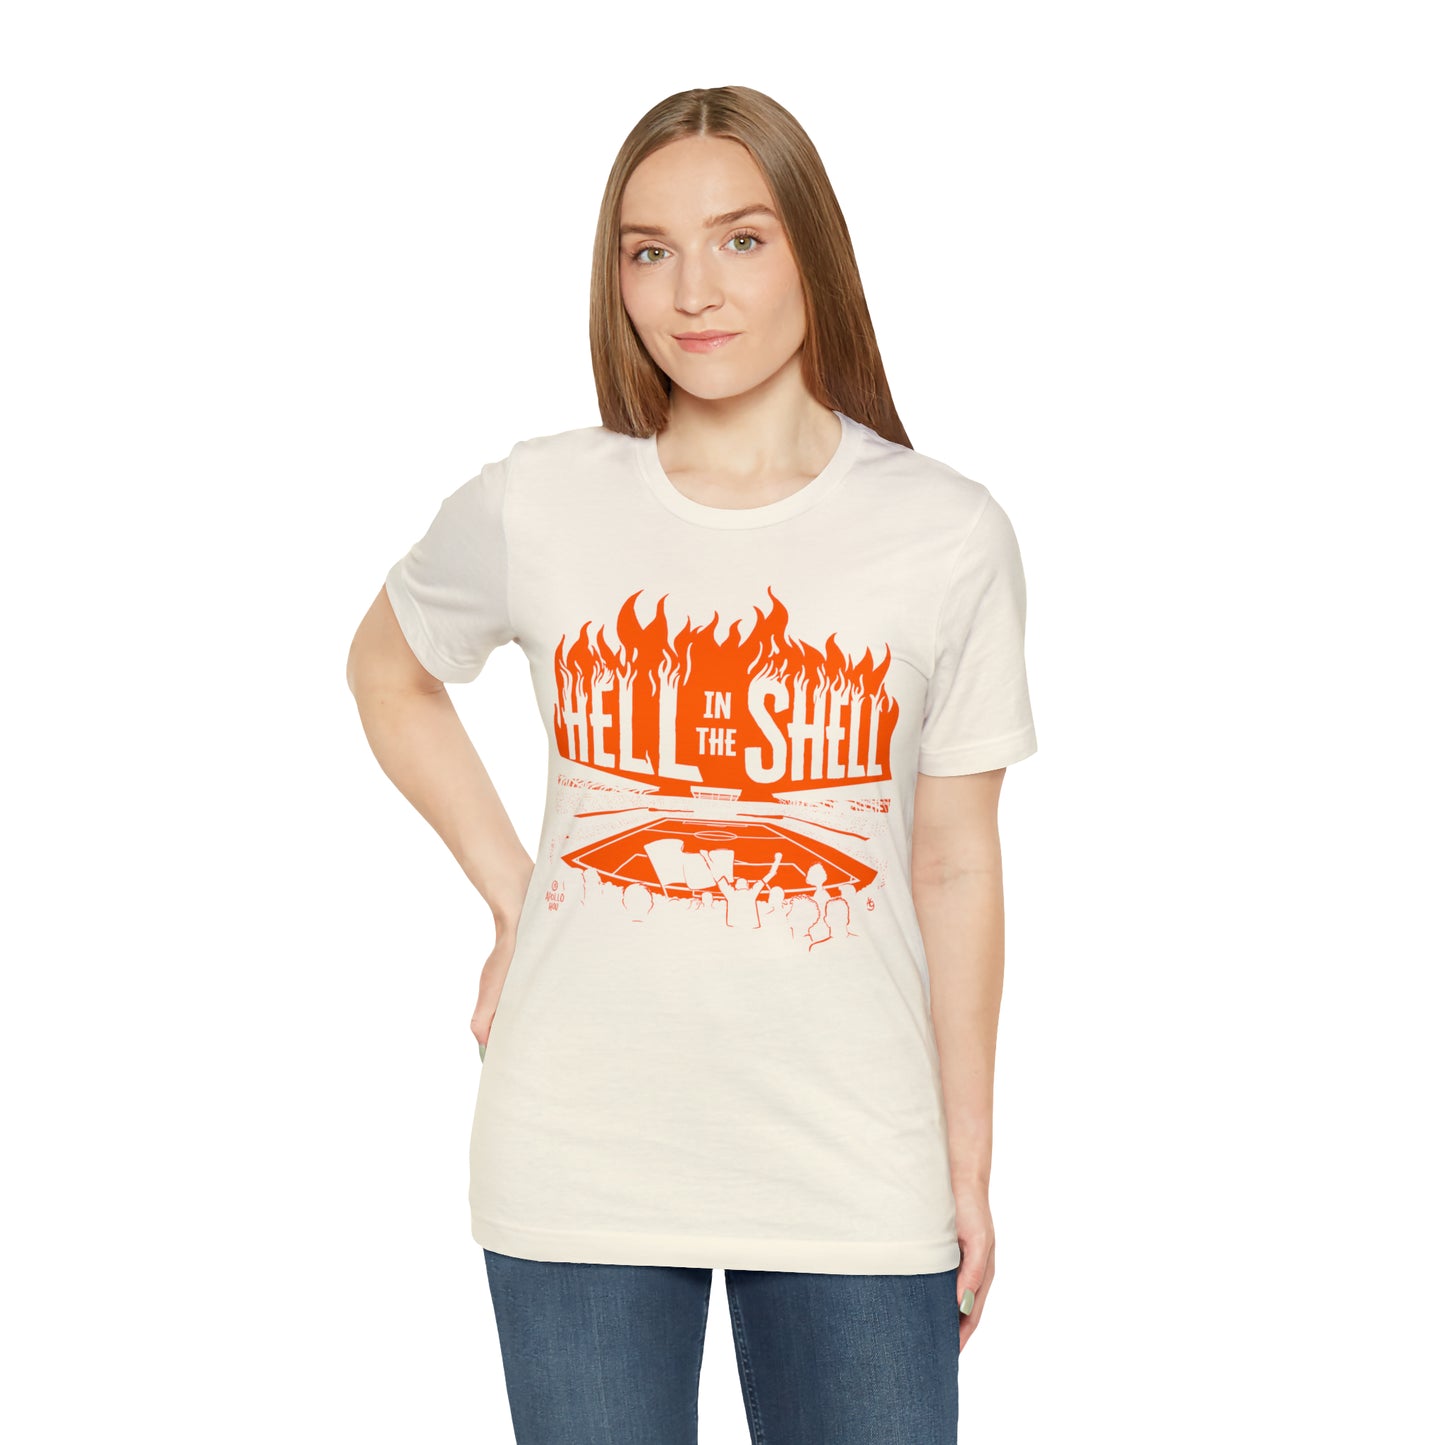 Hell In The Shell Unisex Jersey Short Sleeve Tee